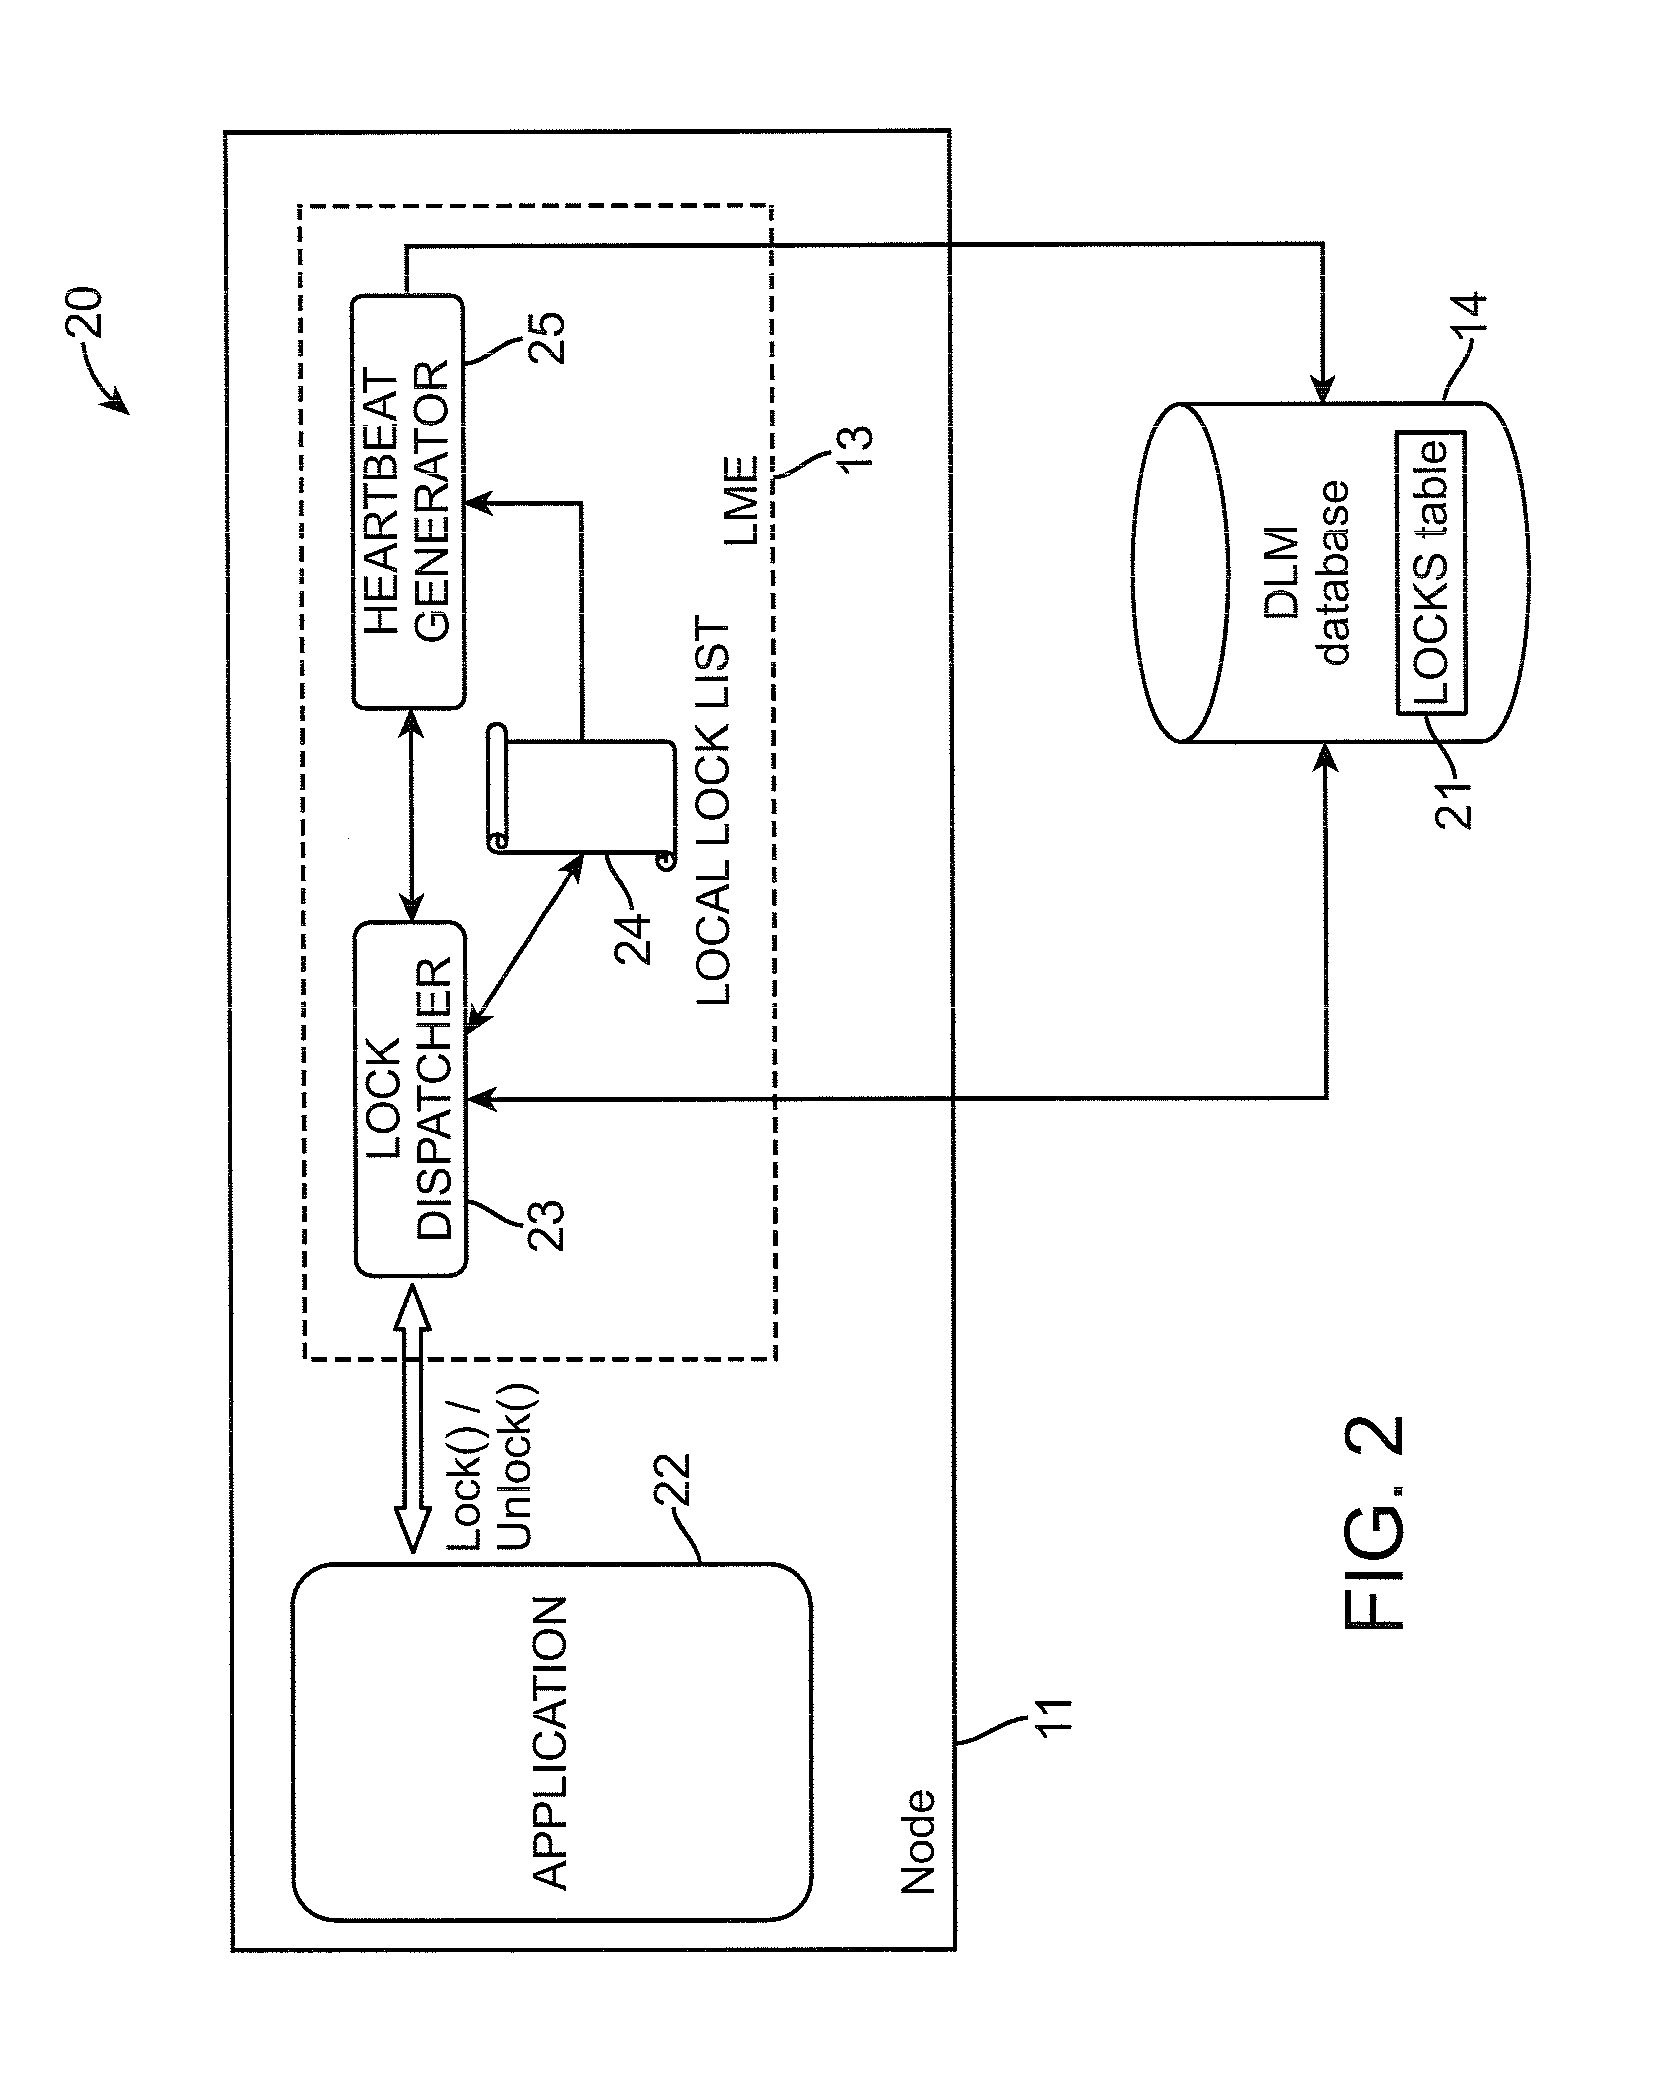 System and method for managing locks across distributed computing nodes